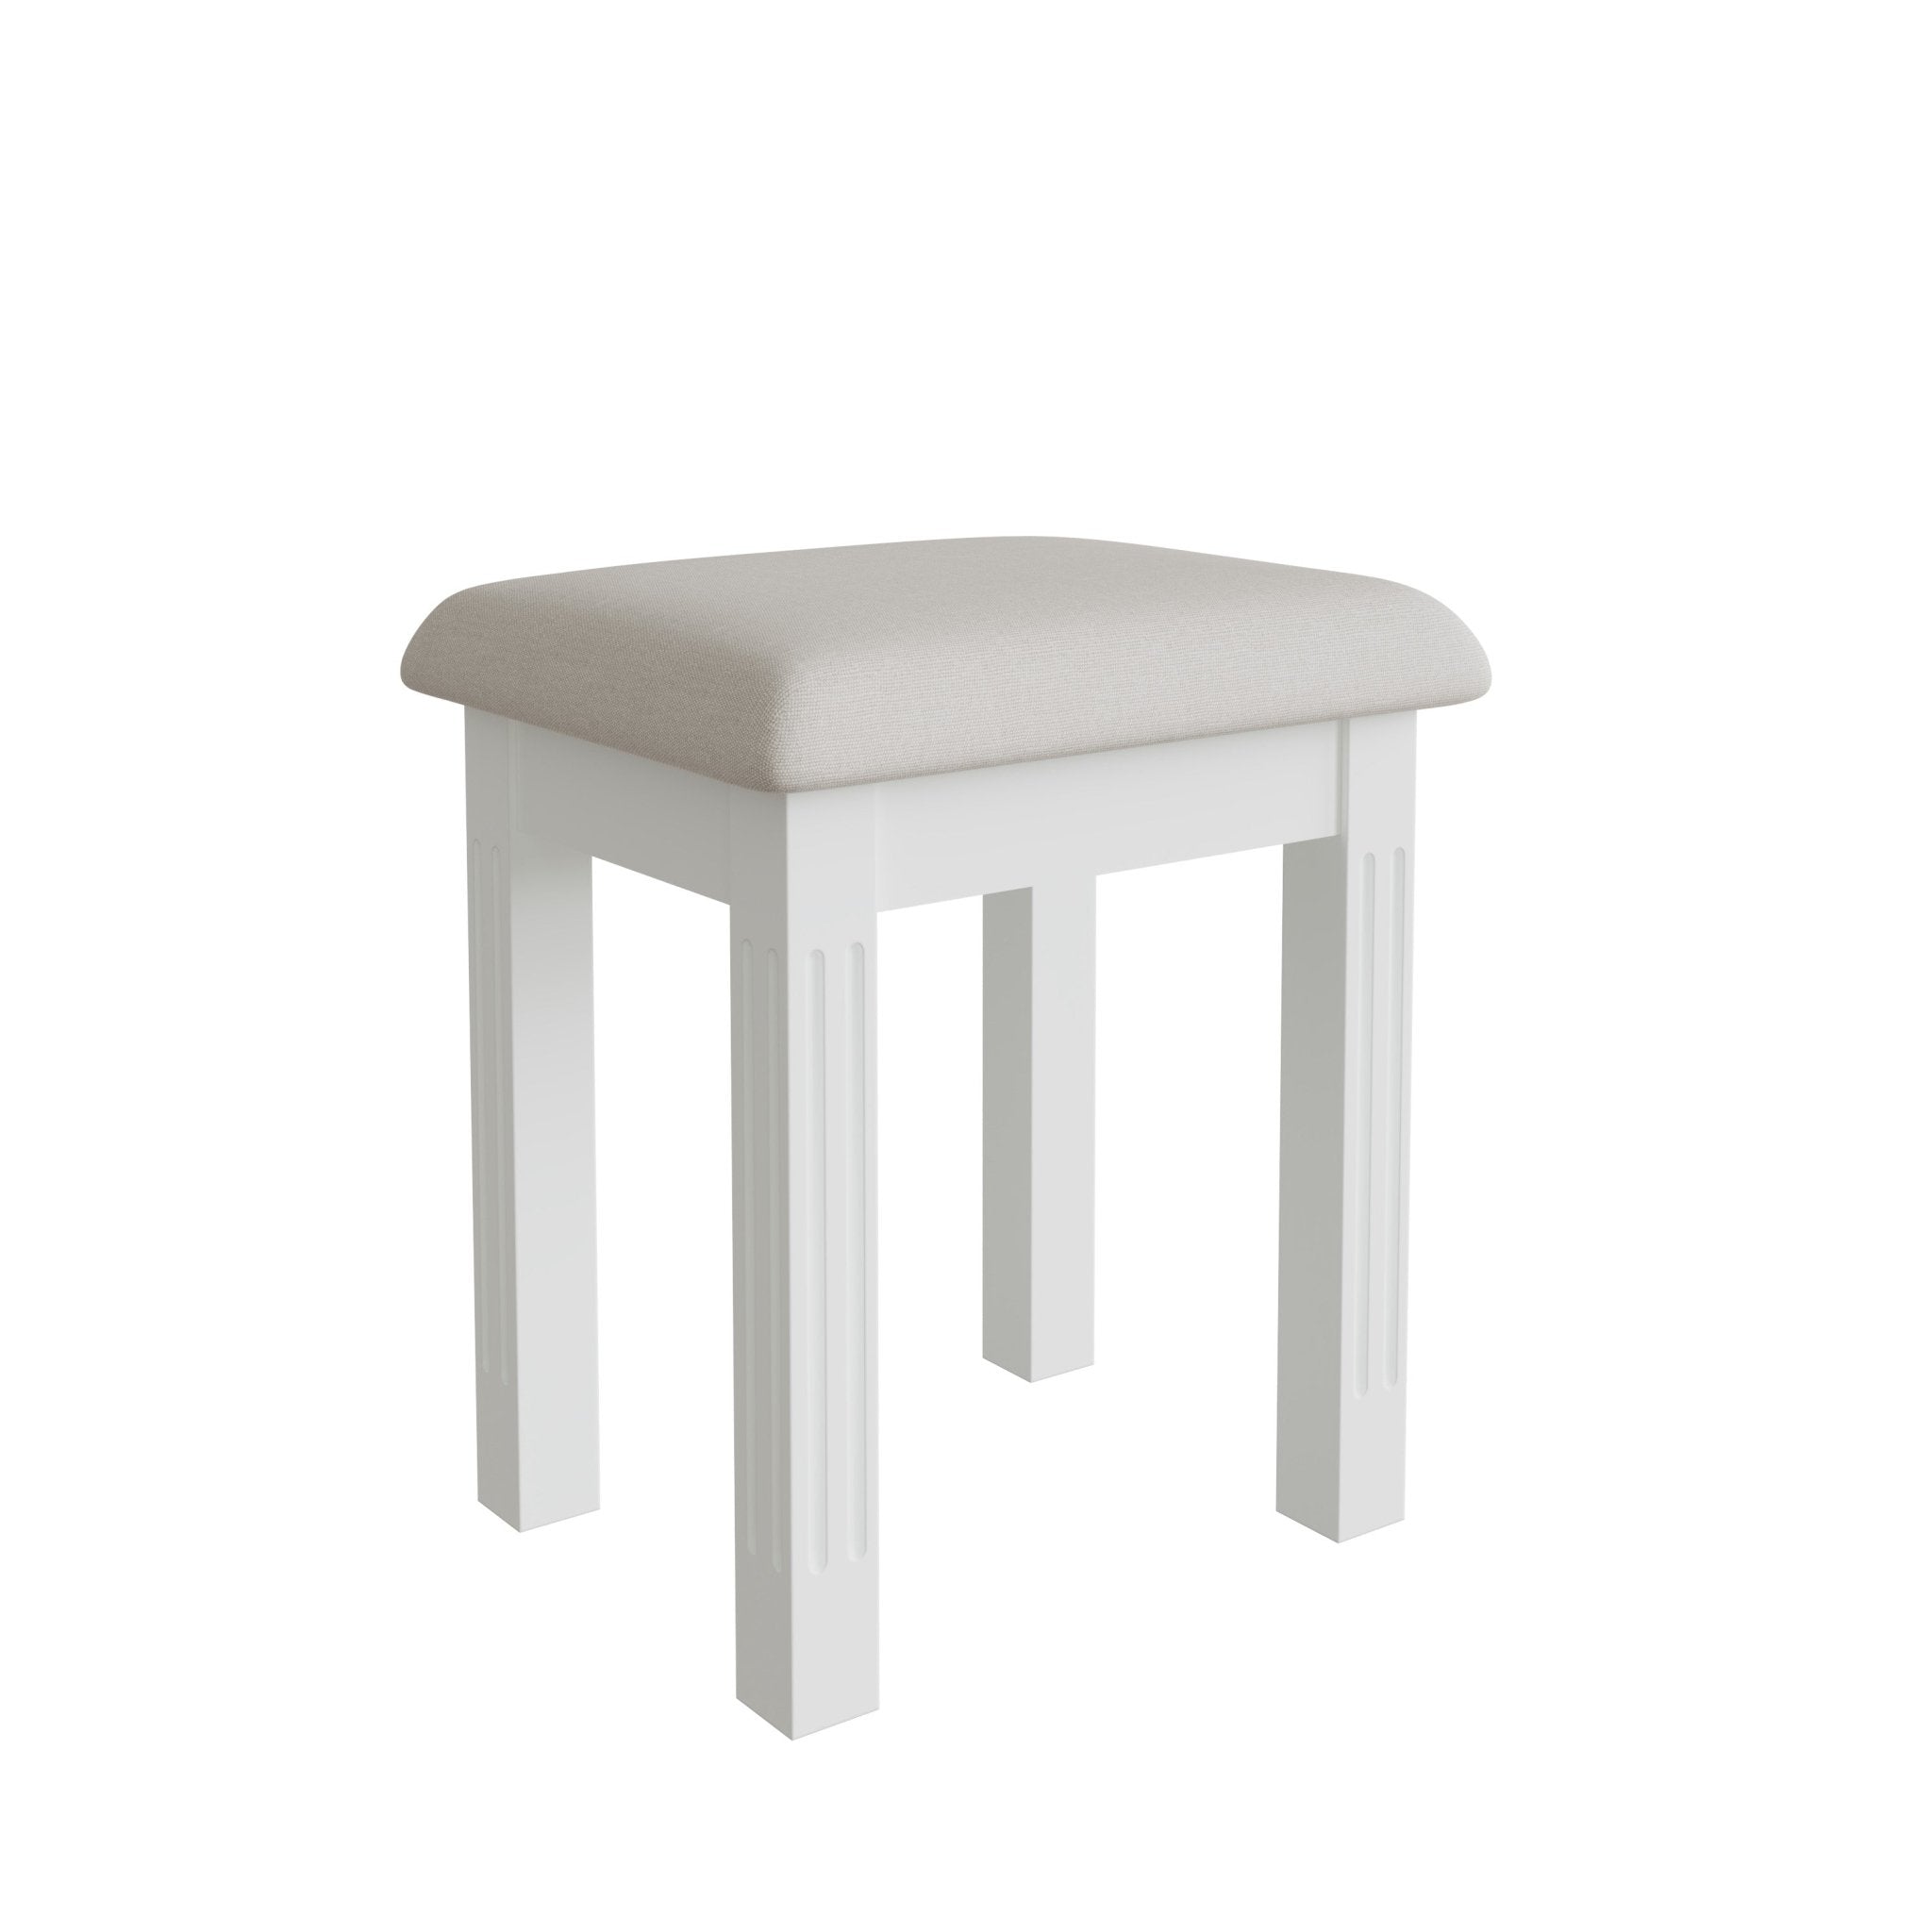 Snowdrop White Painted Dressing Table Stool - Duck Barn Interiors